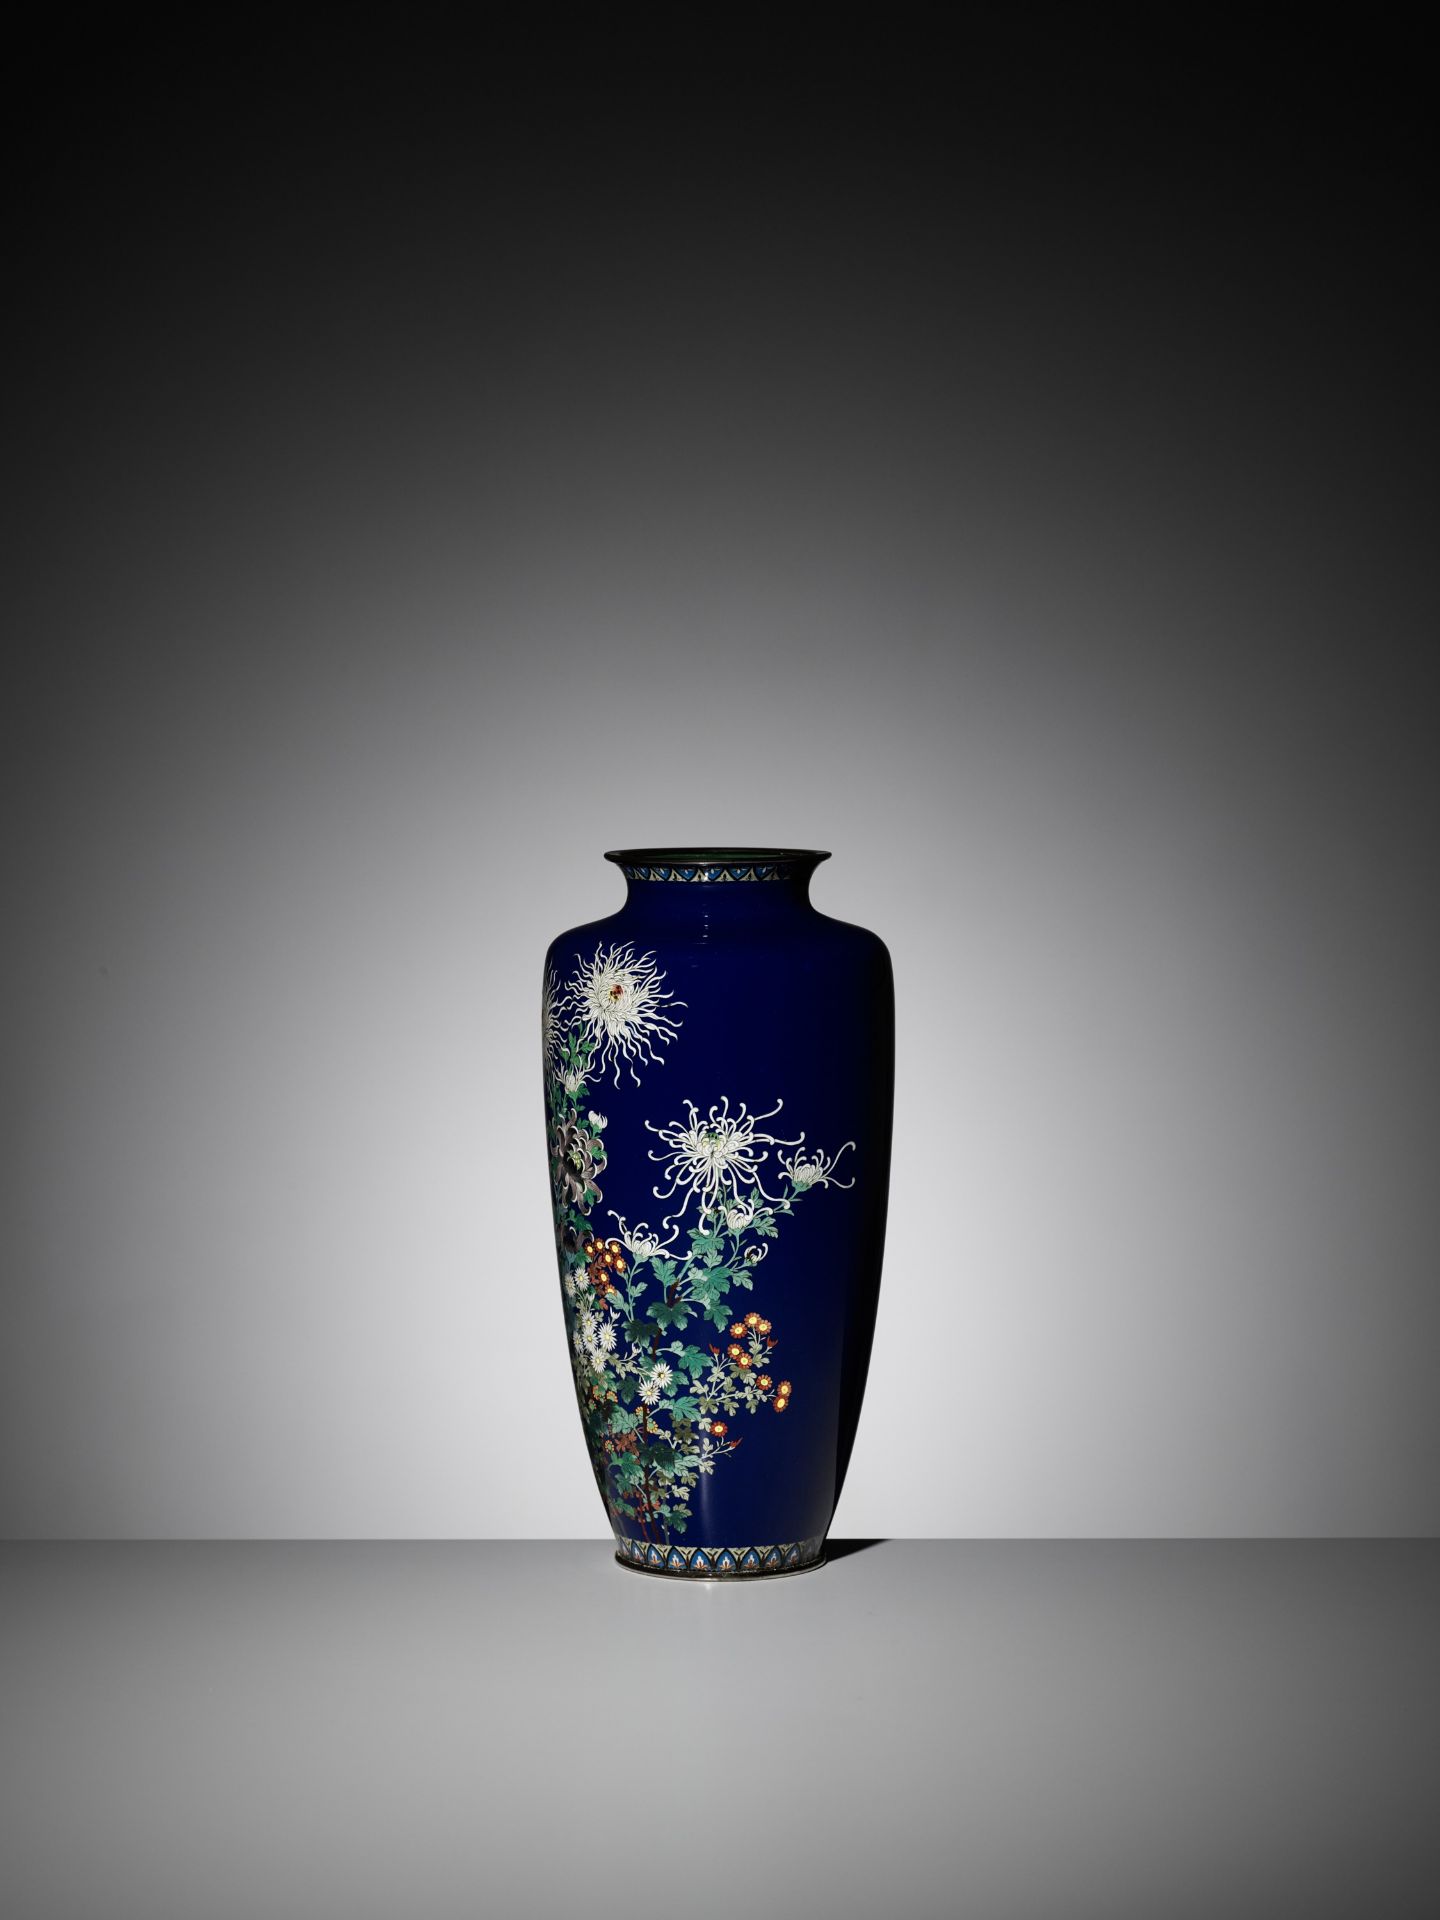 A LARGE MIDNIGHT-BLUE CLOISONNÃ‰ VASE WITH FLOWERS - Image 4 of 10